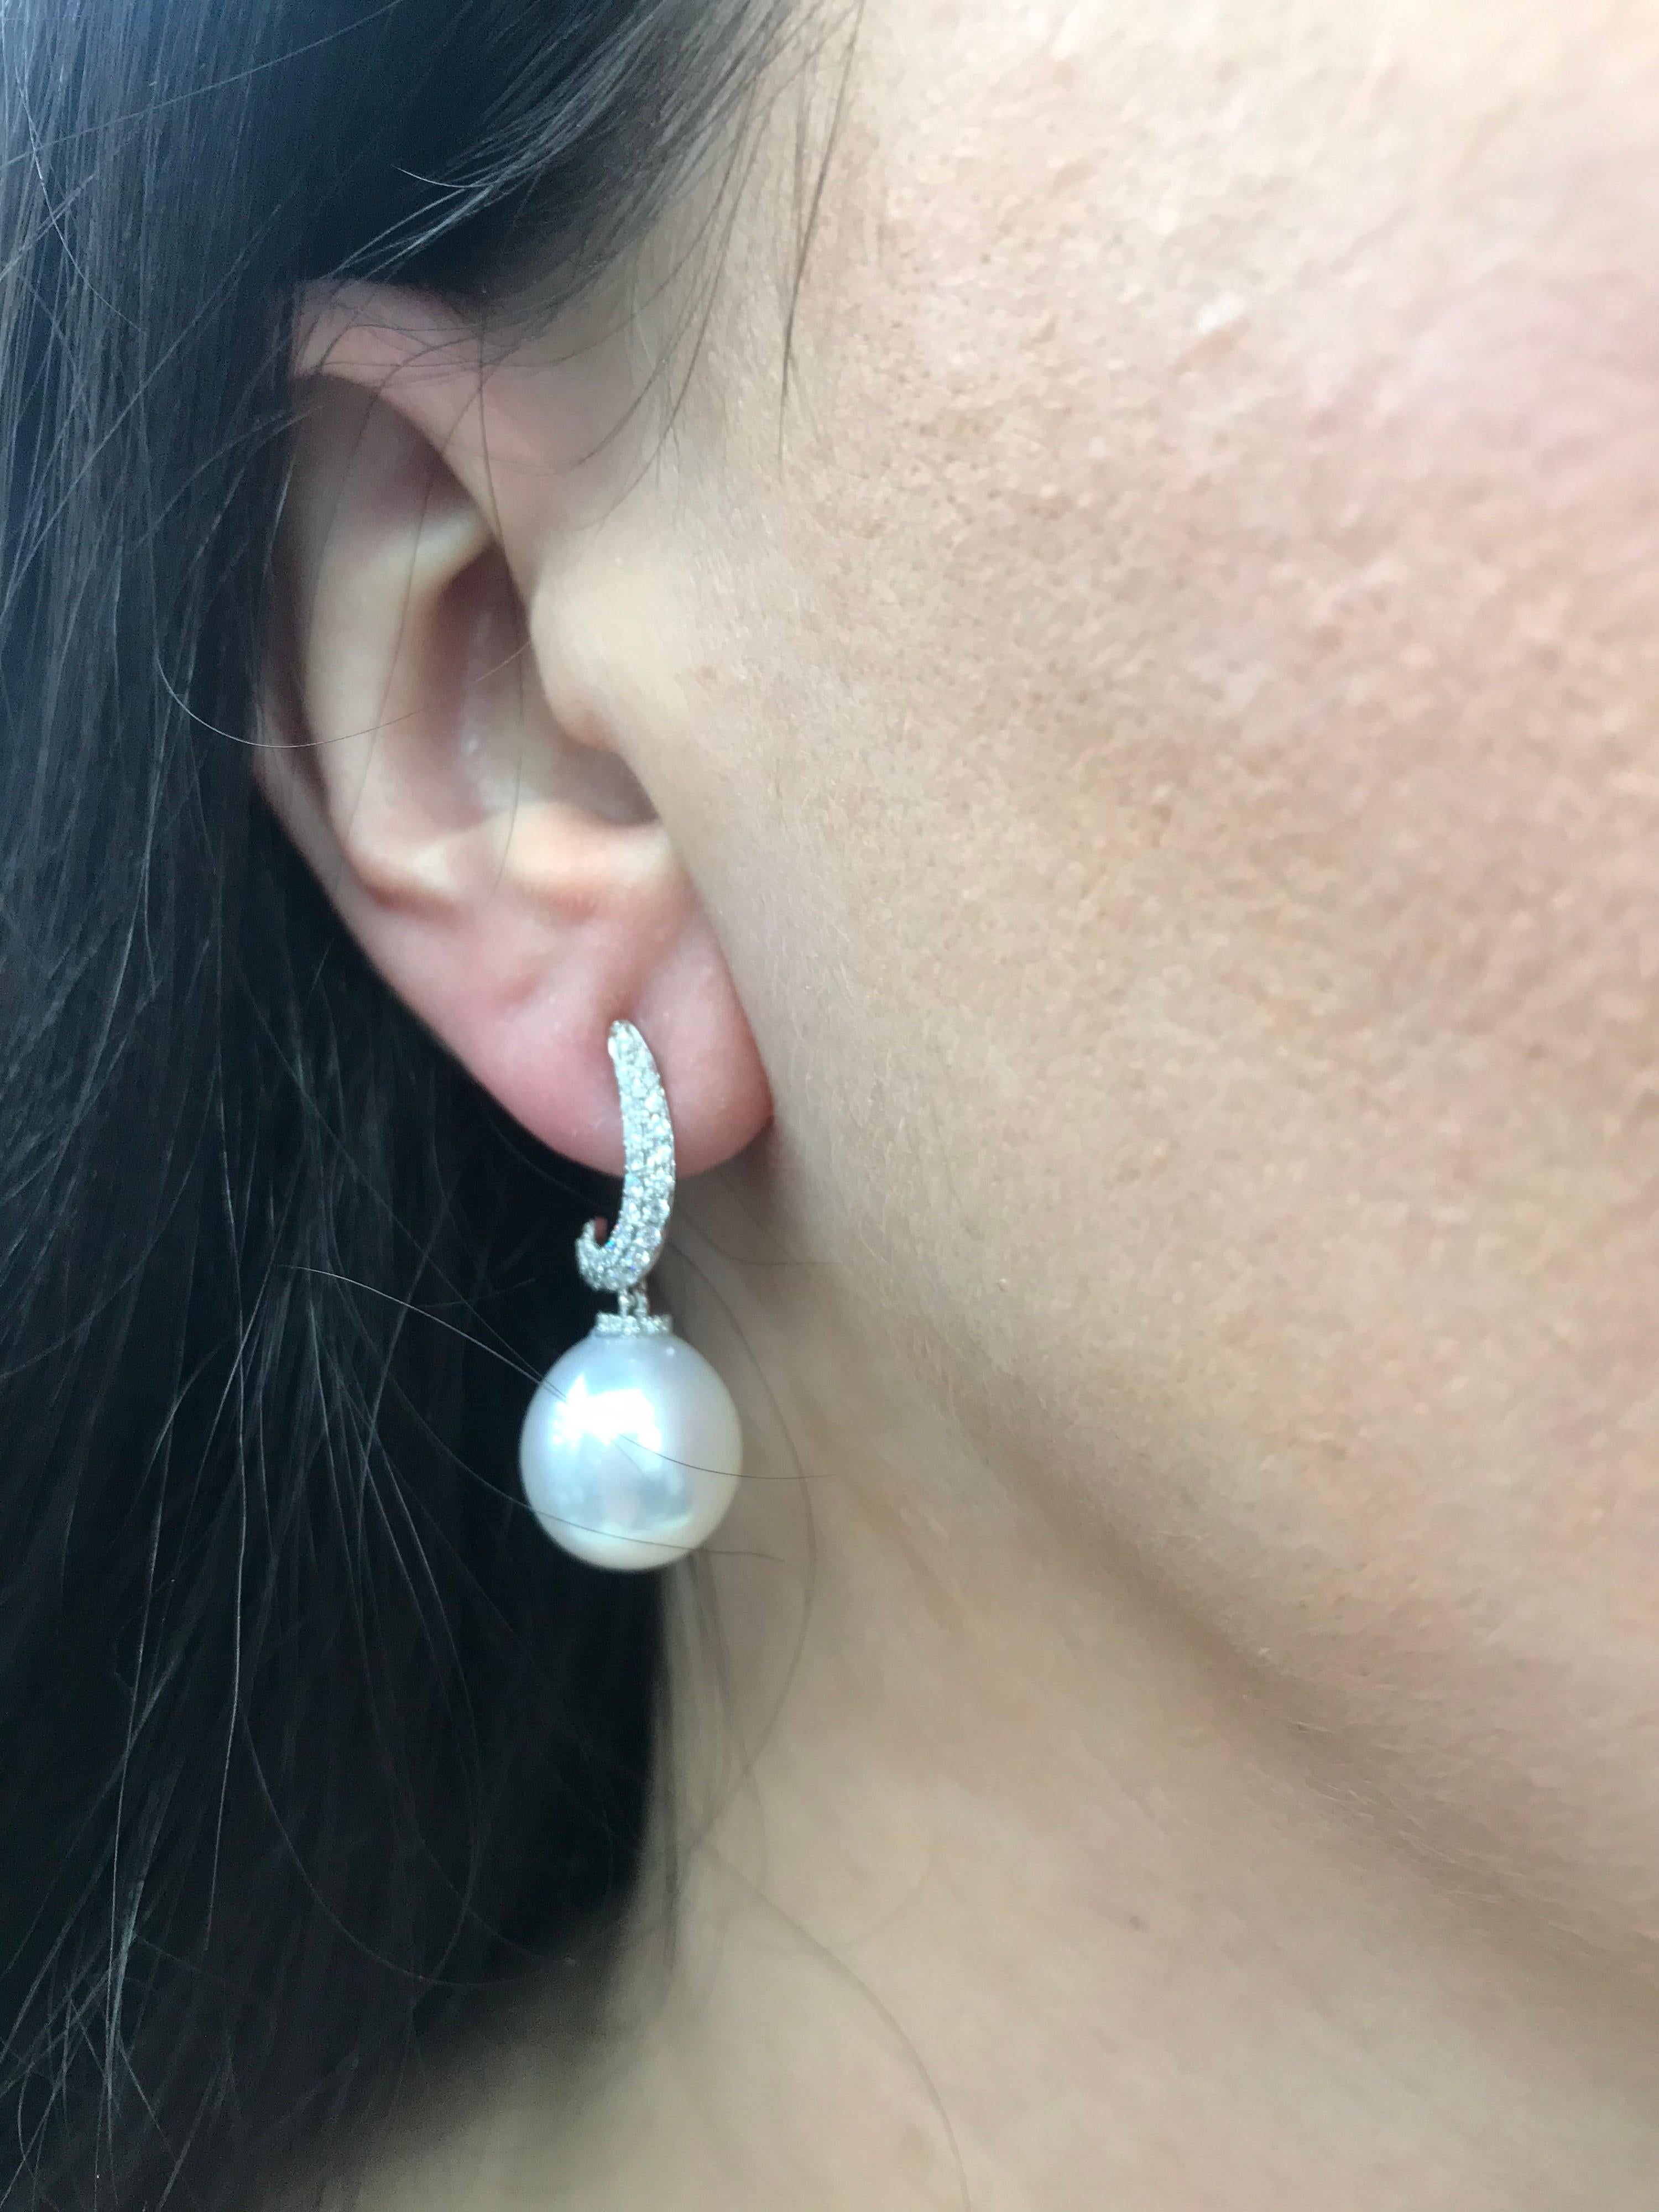 18K White gold drop earrings featuring two South Sea Pearls measuring 12-13 mm with 74 round brilliants weighing 0.48 carats.
Color G-H
Clarity SI